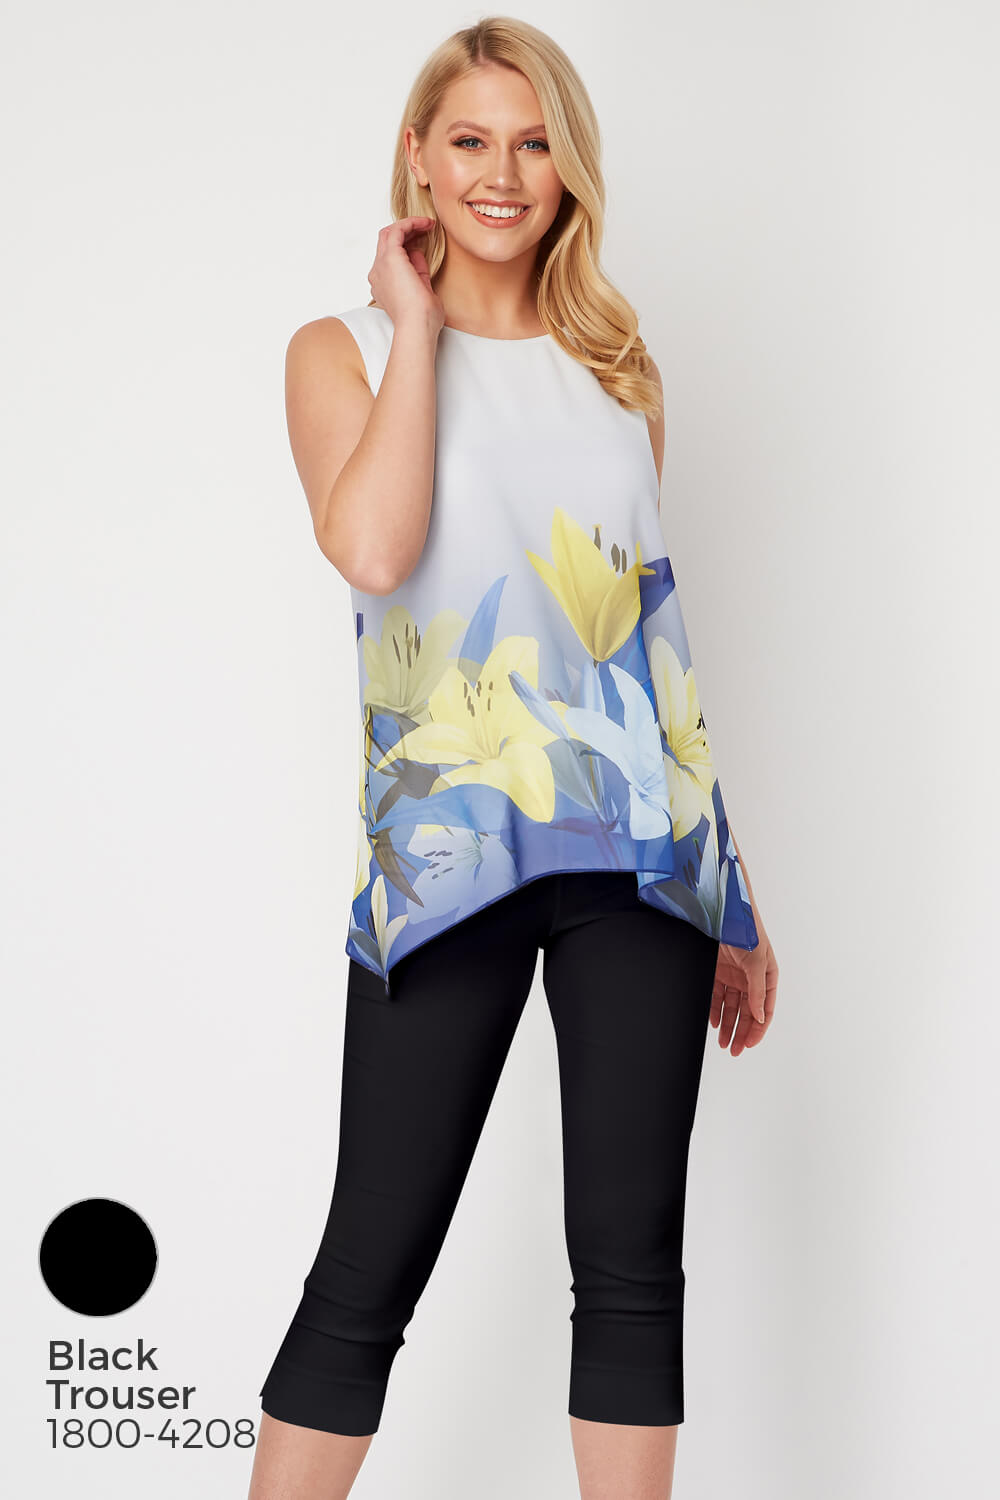 Blue Floral Border Print Overlay Top, Image 7 of 8